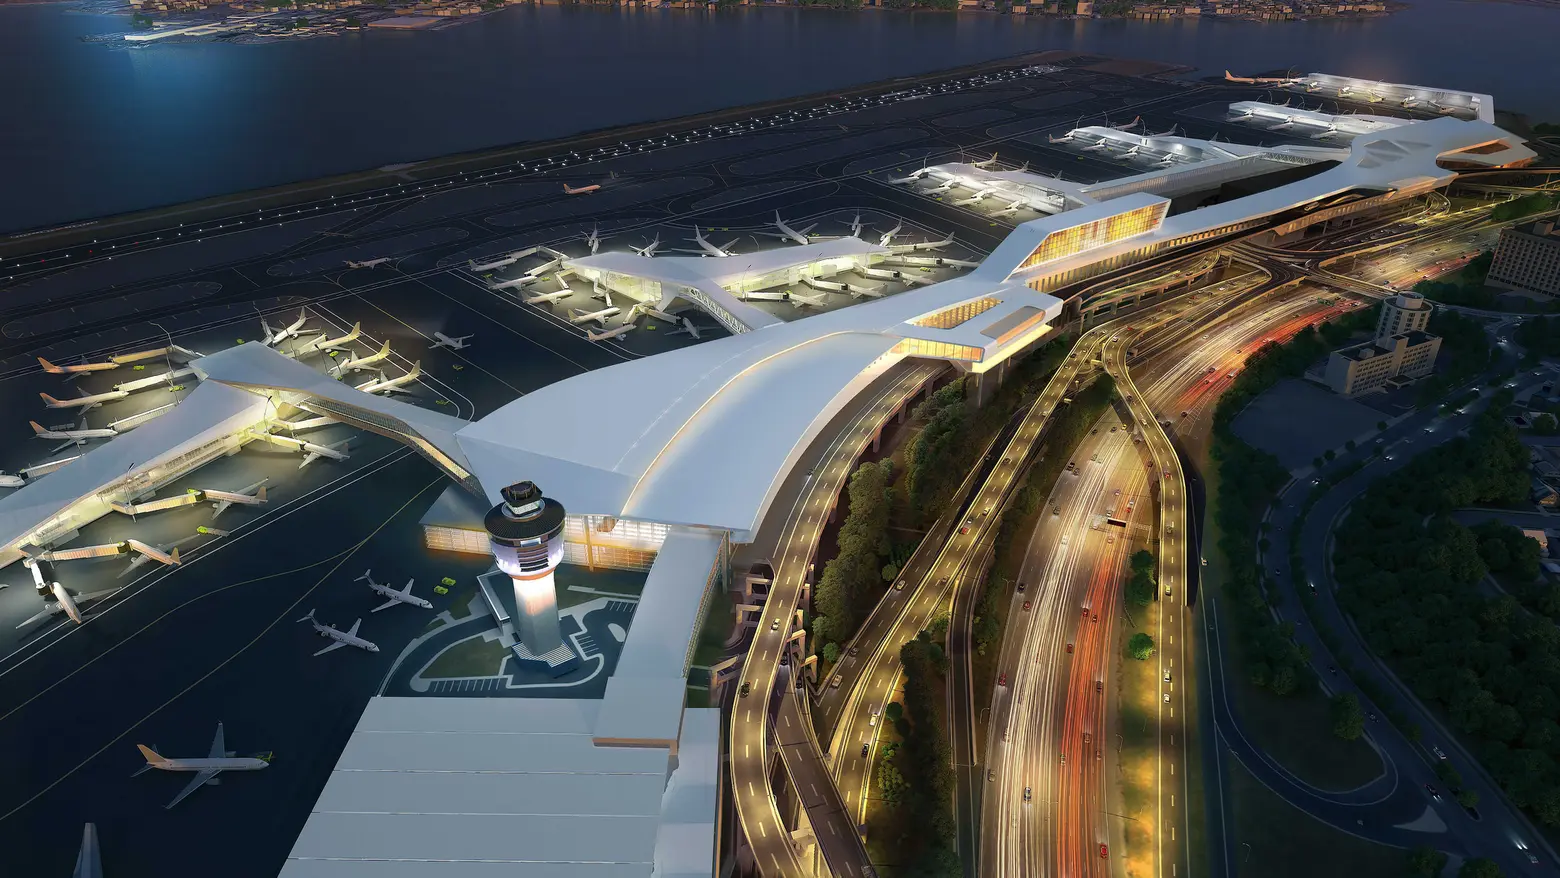 LaGuardia Airport Overhaul Will Cost More Than $7B, Cuomo Releases New Renderings